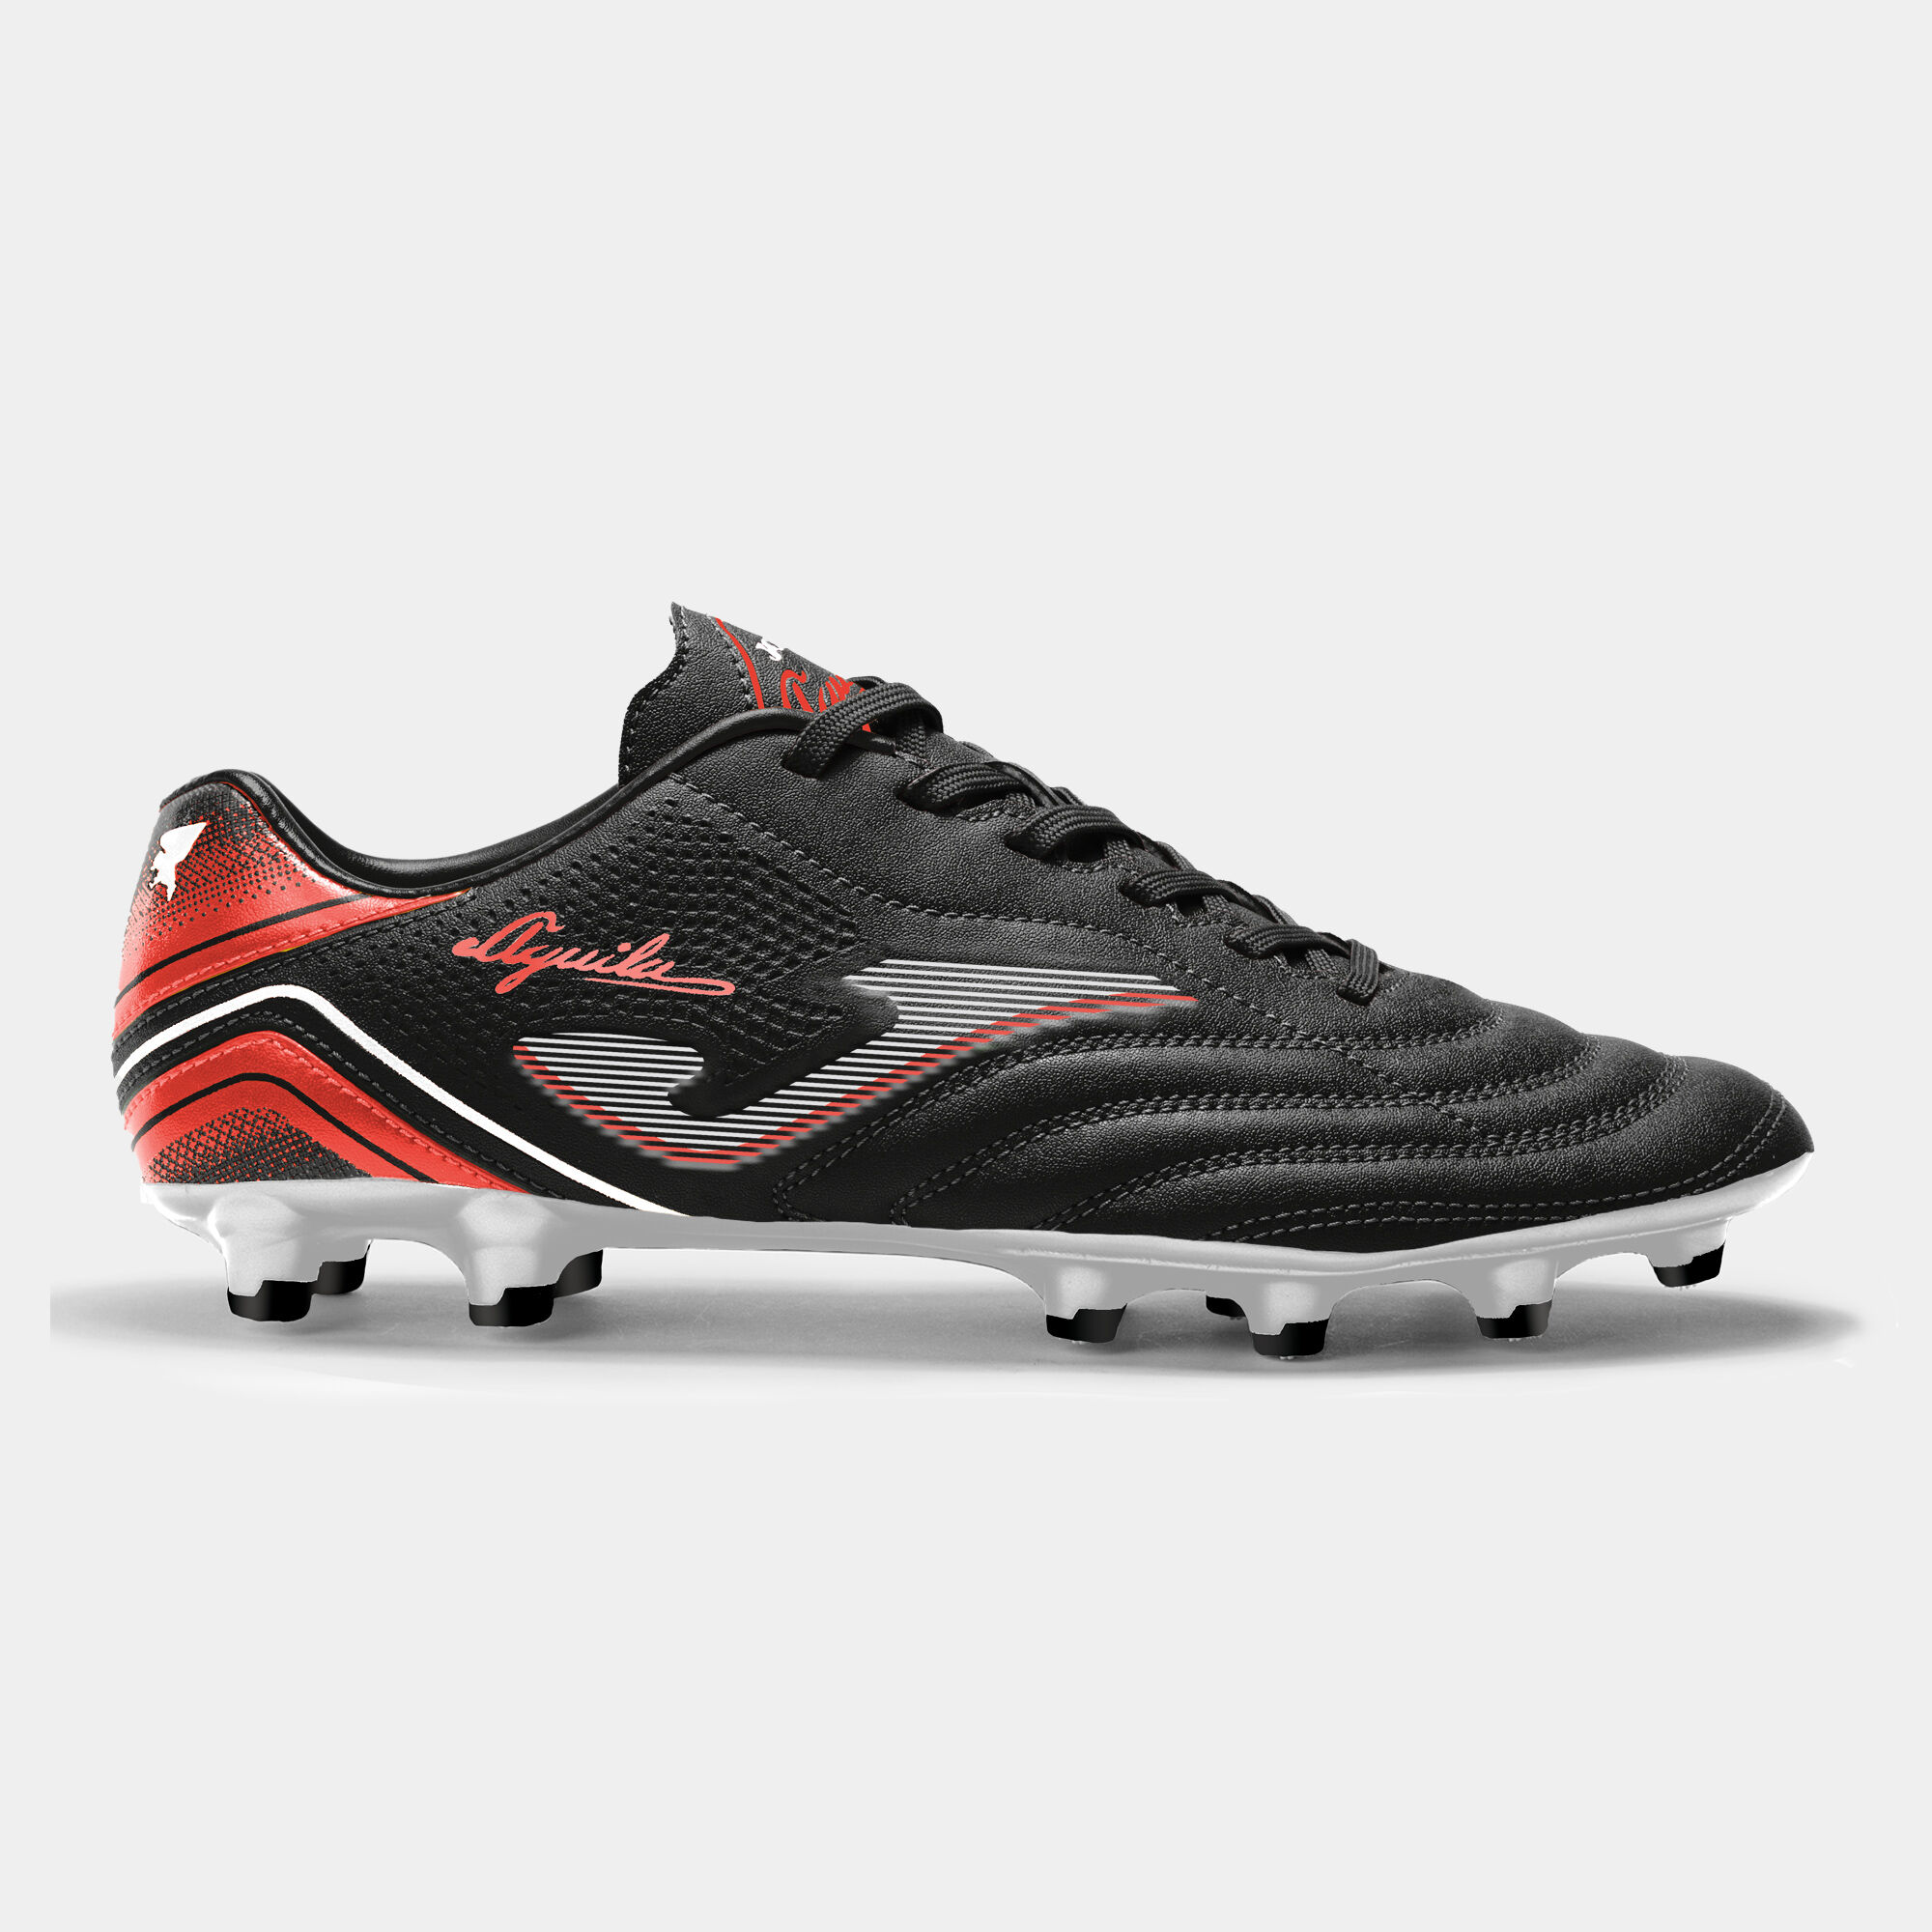 FOOTBALL BOOTS AGUILA 22 FIRM GROUND FG BLACK RED